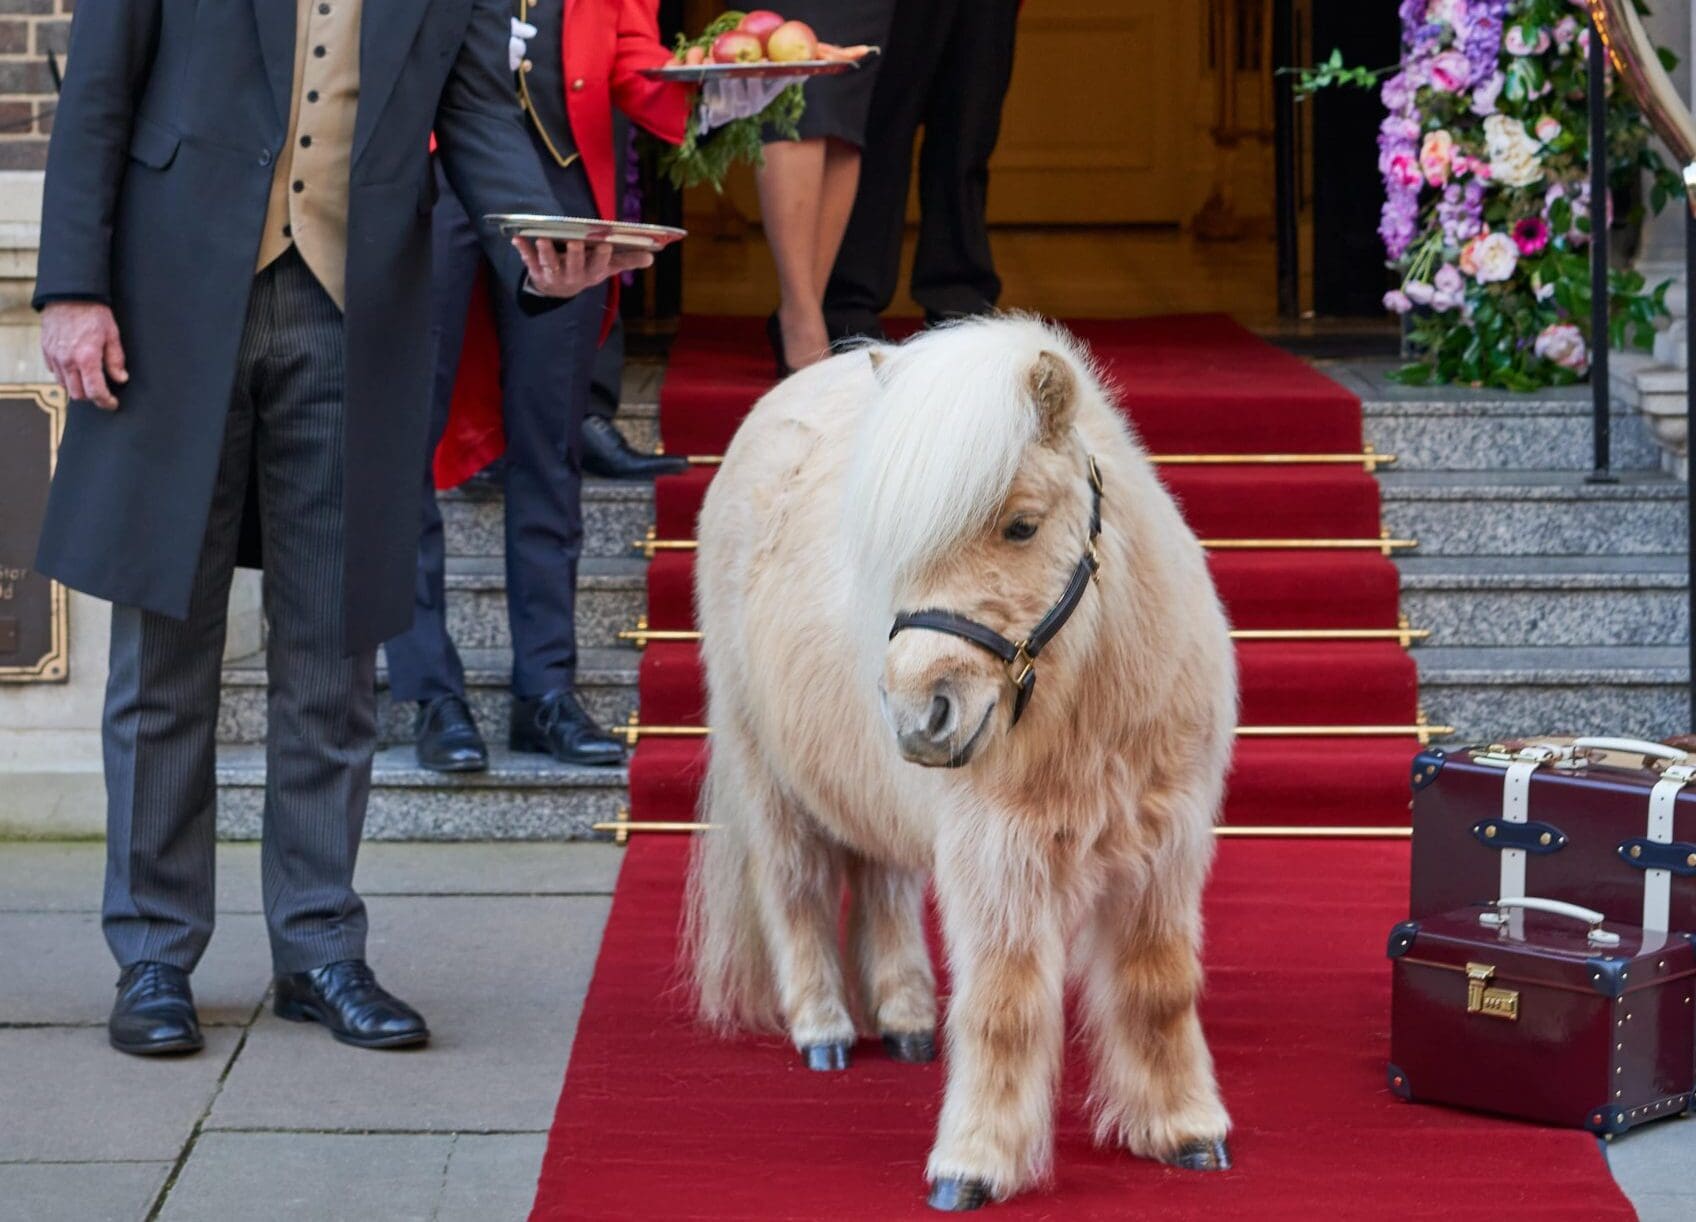 teddy the pony at the goring exterior hotel entrance